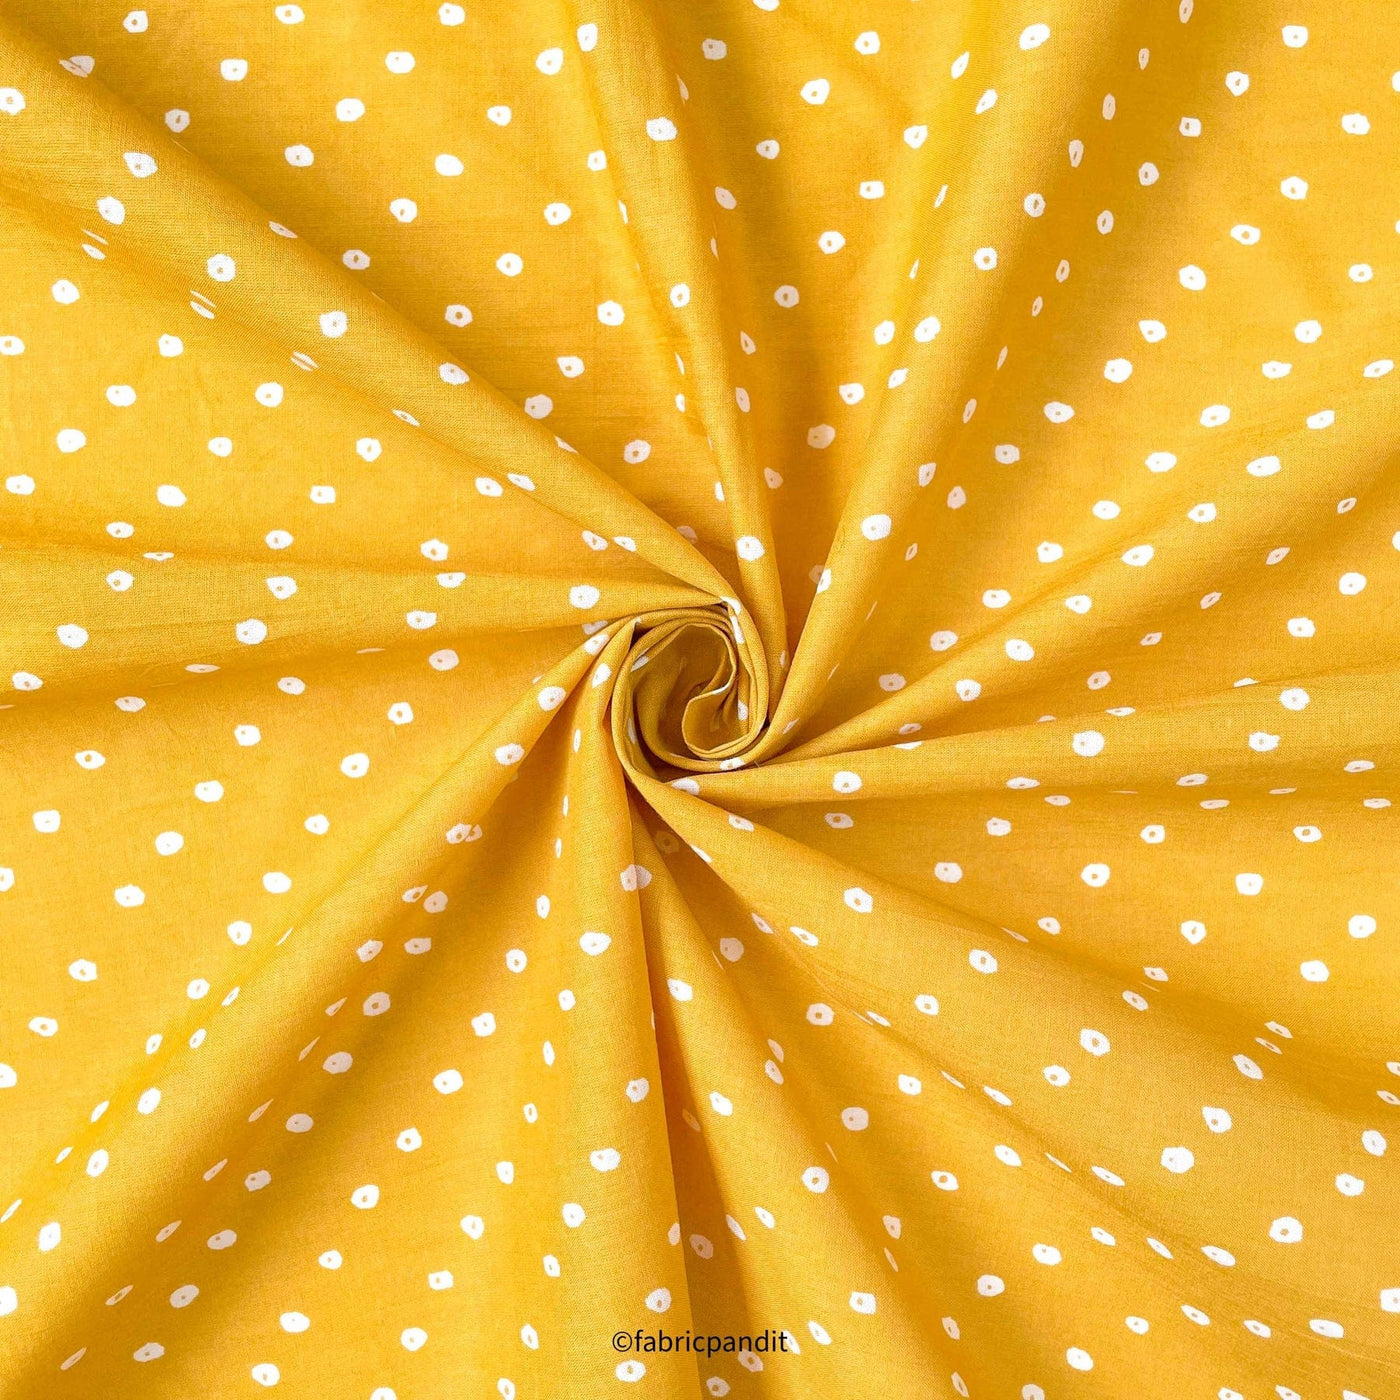 Hand Block Printed Cotton Fabric Cut Piece (CUT PIECE) Bright Yellow & White Allover Bandhani Hand Block Printed Pure Cotton Fabric (Width 42 inches)